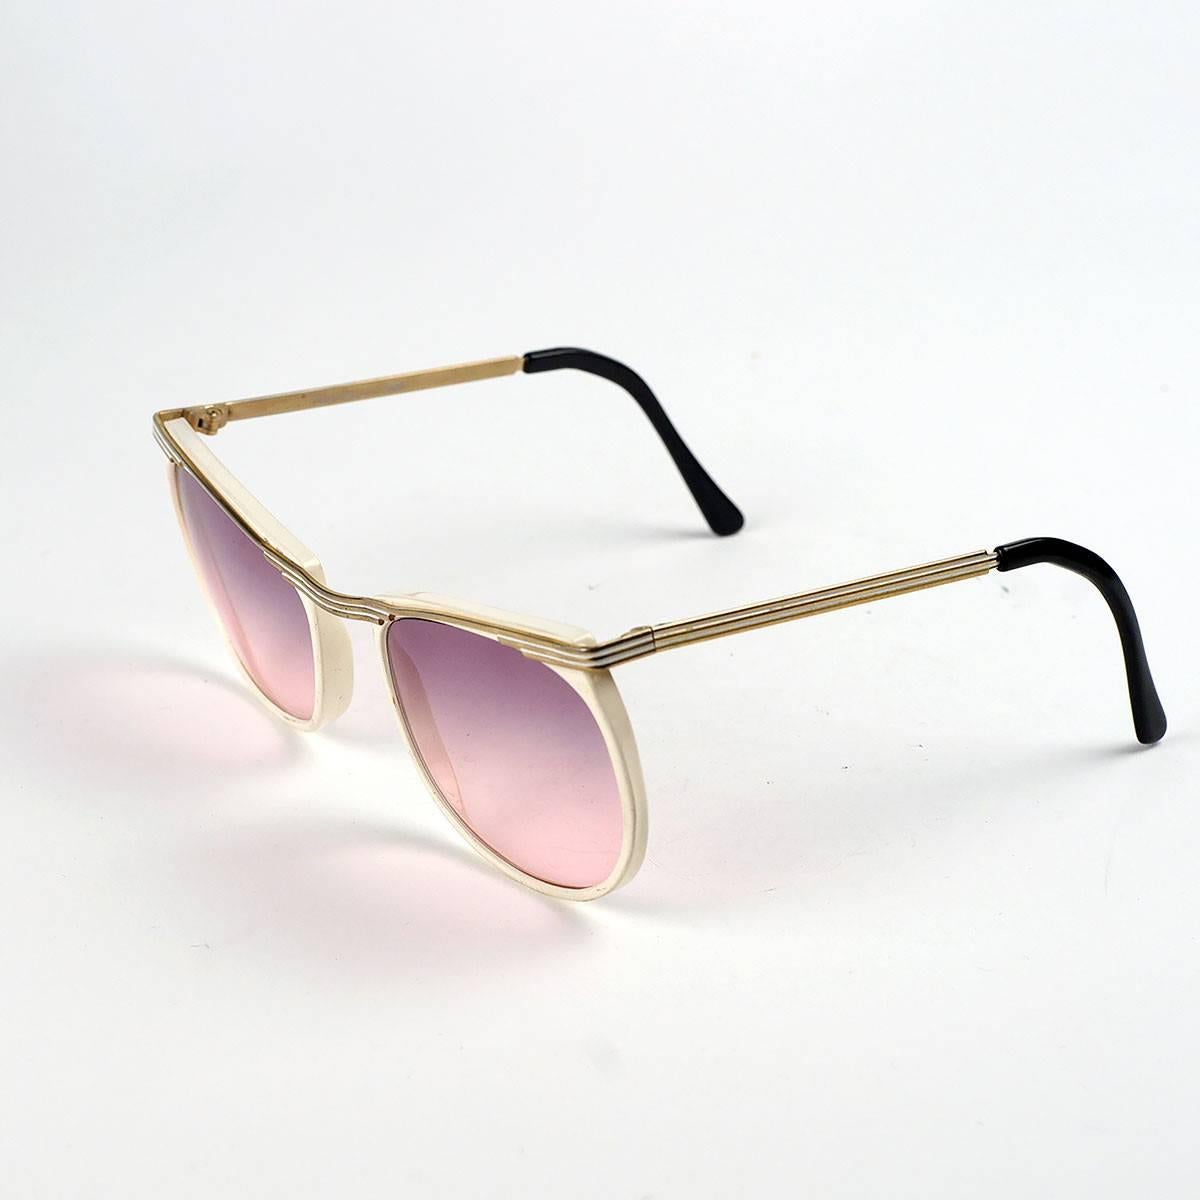 EUROSPORT sunglasses with pink tinted lens and gold accented white frames, part of the Daniel Hunter collection by Rem. 

Made In France. 

-Measurements-
Lens- 1.5 inches high, 2 inches wide 
Arm- 4.5 inches 
Frame- 5 inches 
Bridge- 1/2 inch

Good